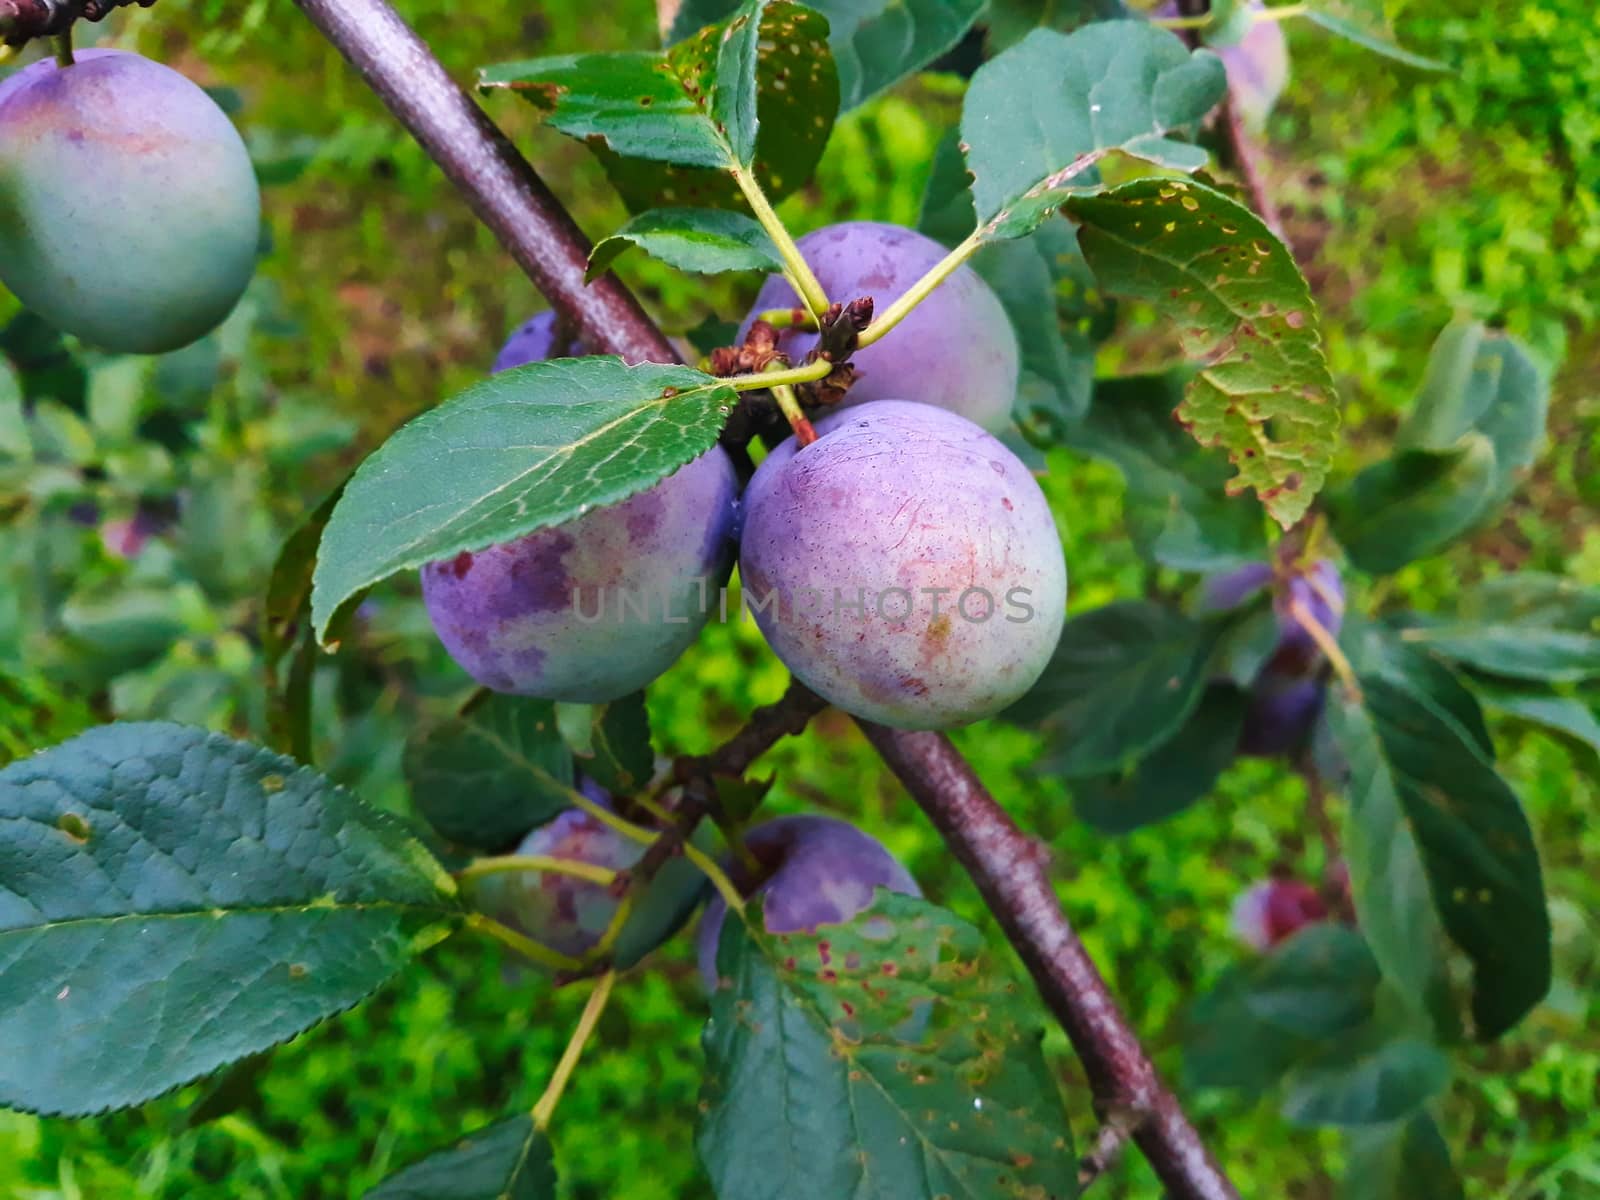 Plums almost got full color. On the branch. Zavidovici, Bosnia and Herzegovina.